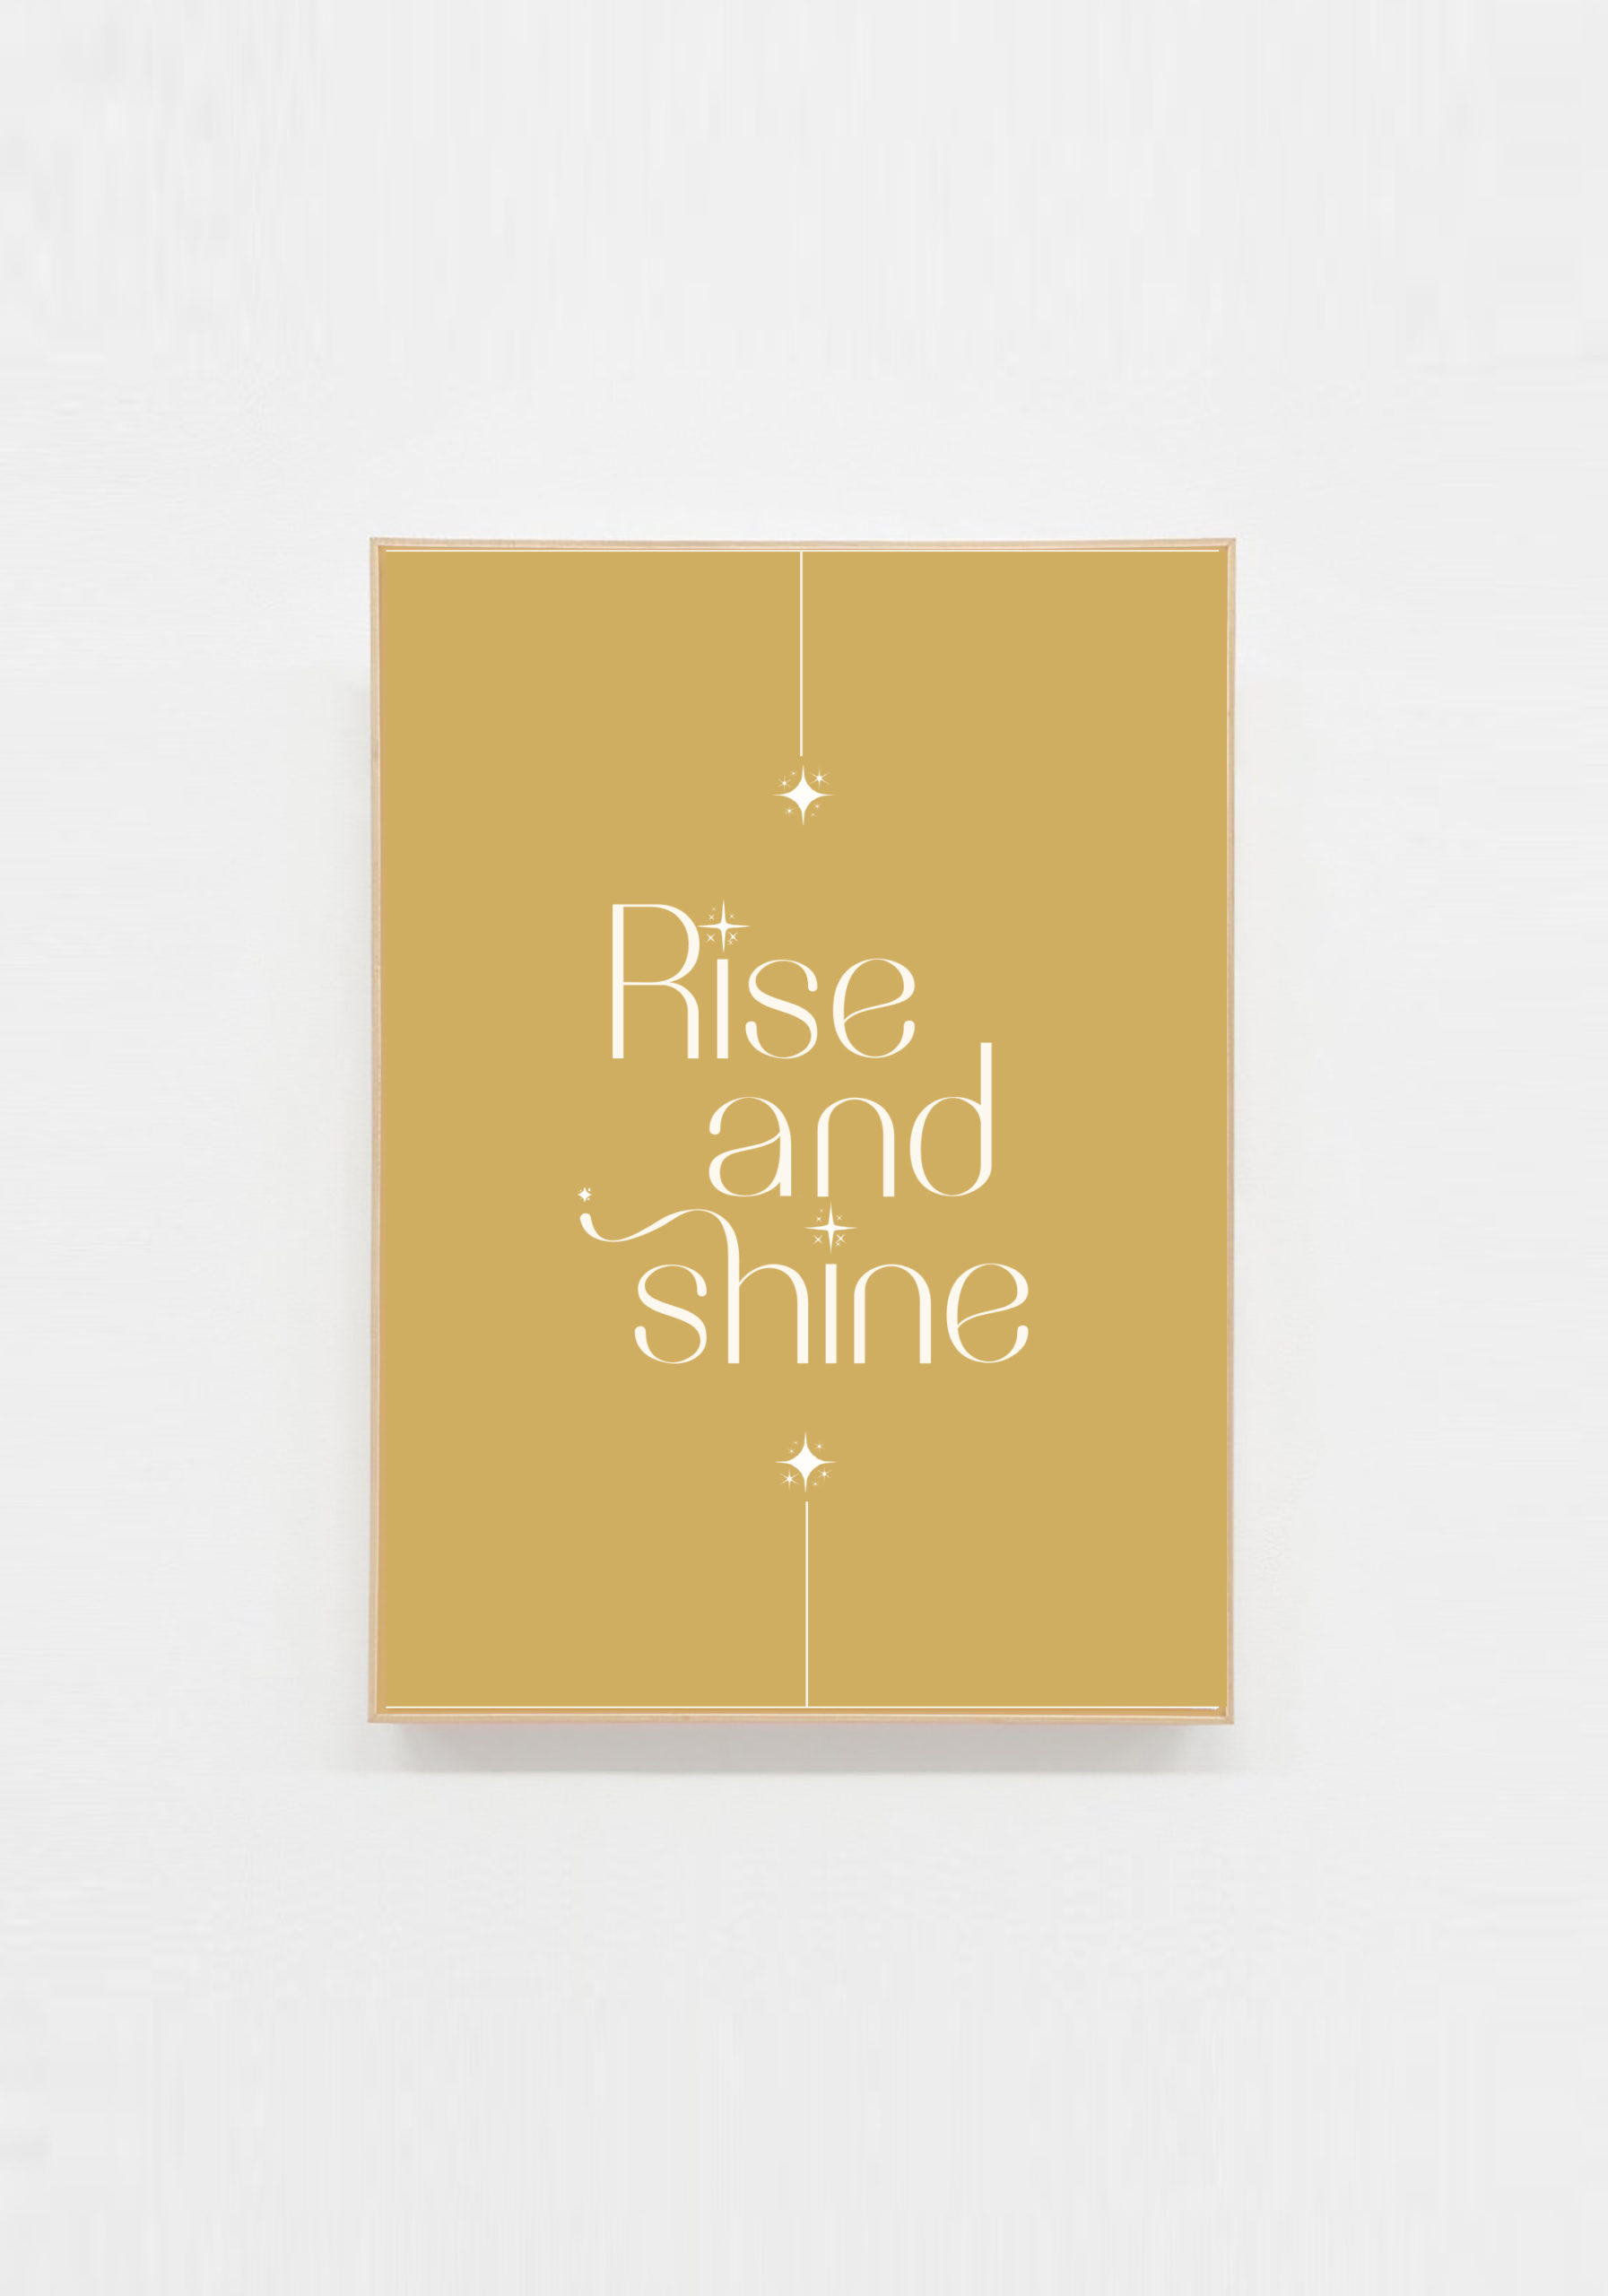 carte postale message positif rise and shine